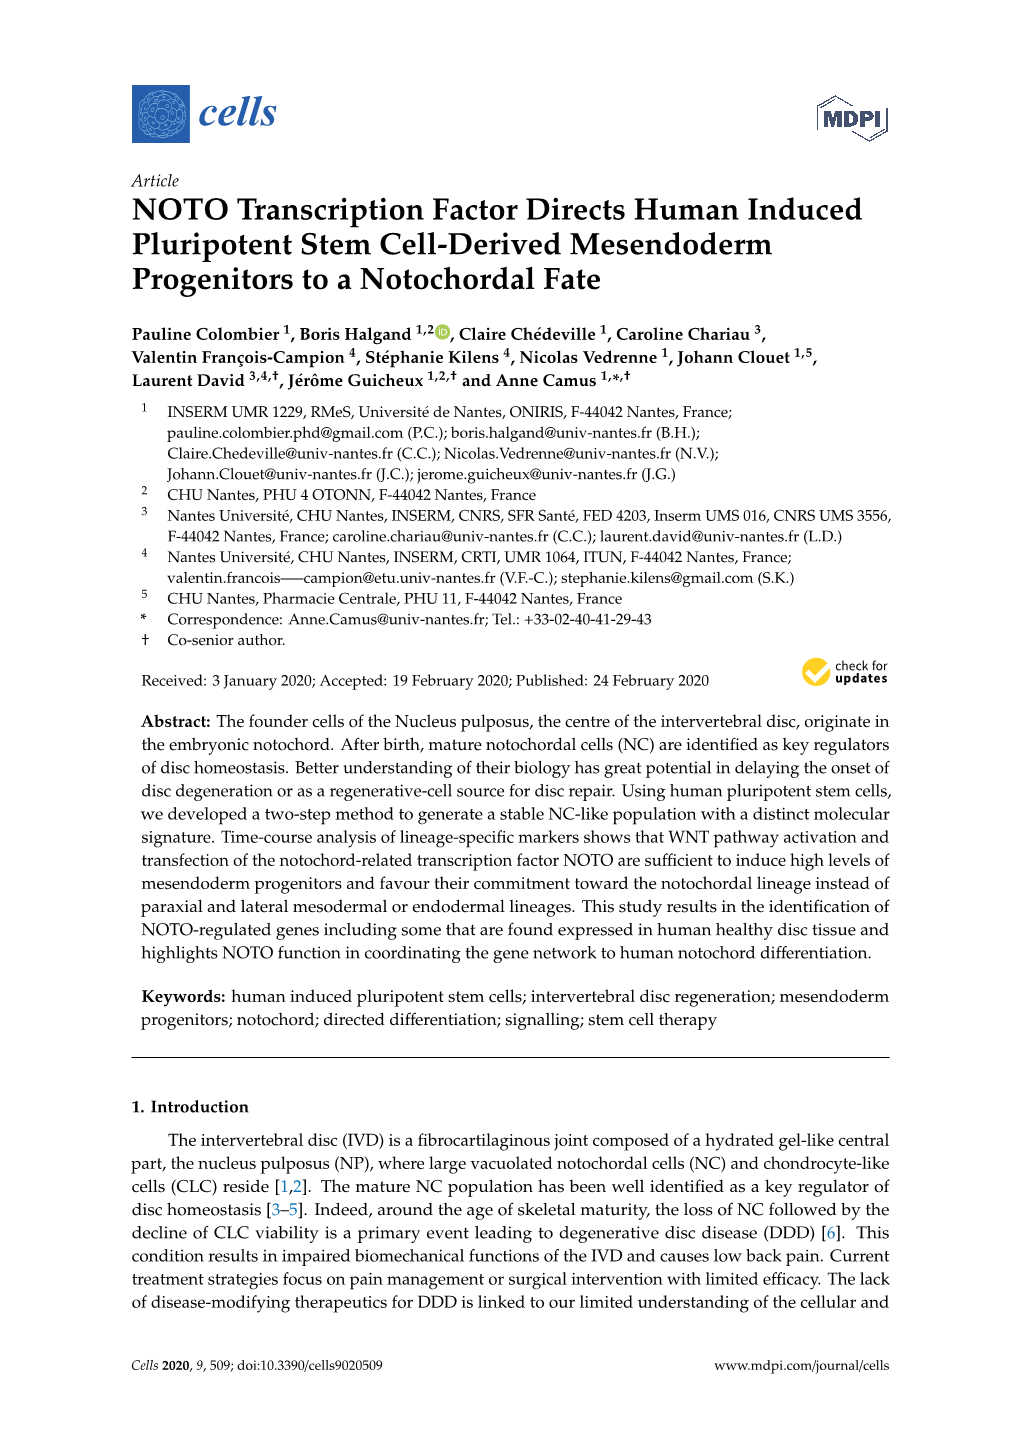 NOTO Transcription Factor Directs Human Induced Pluripotent Stem Cell-Derived Mesendoderm Progenitors to a Notochordal Fate